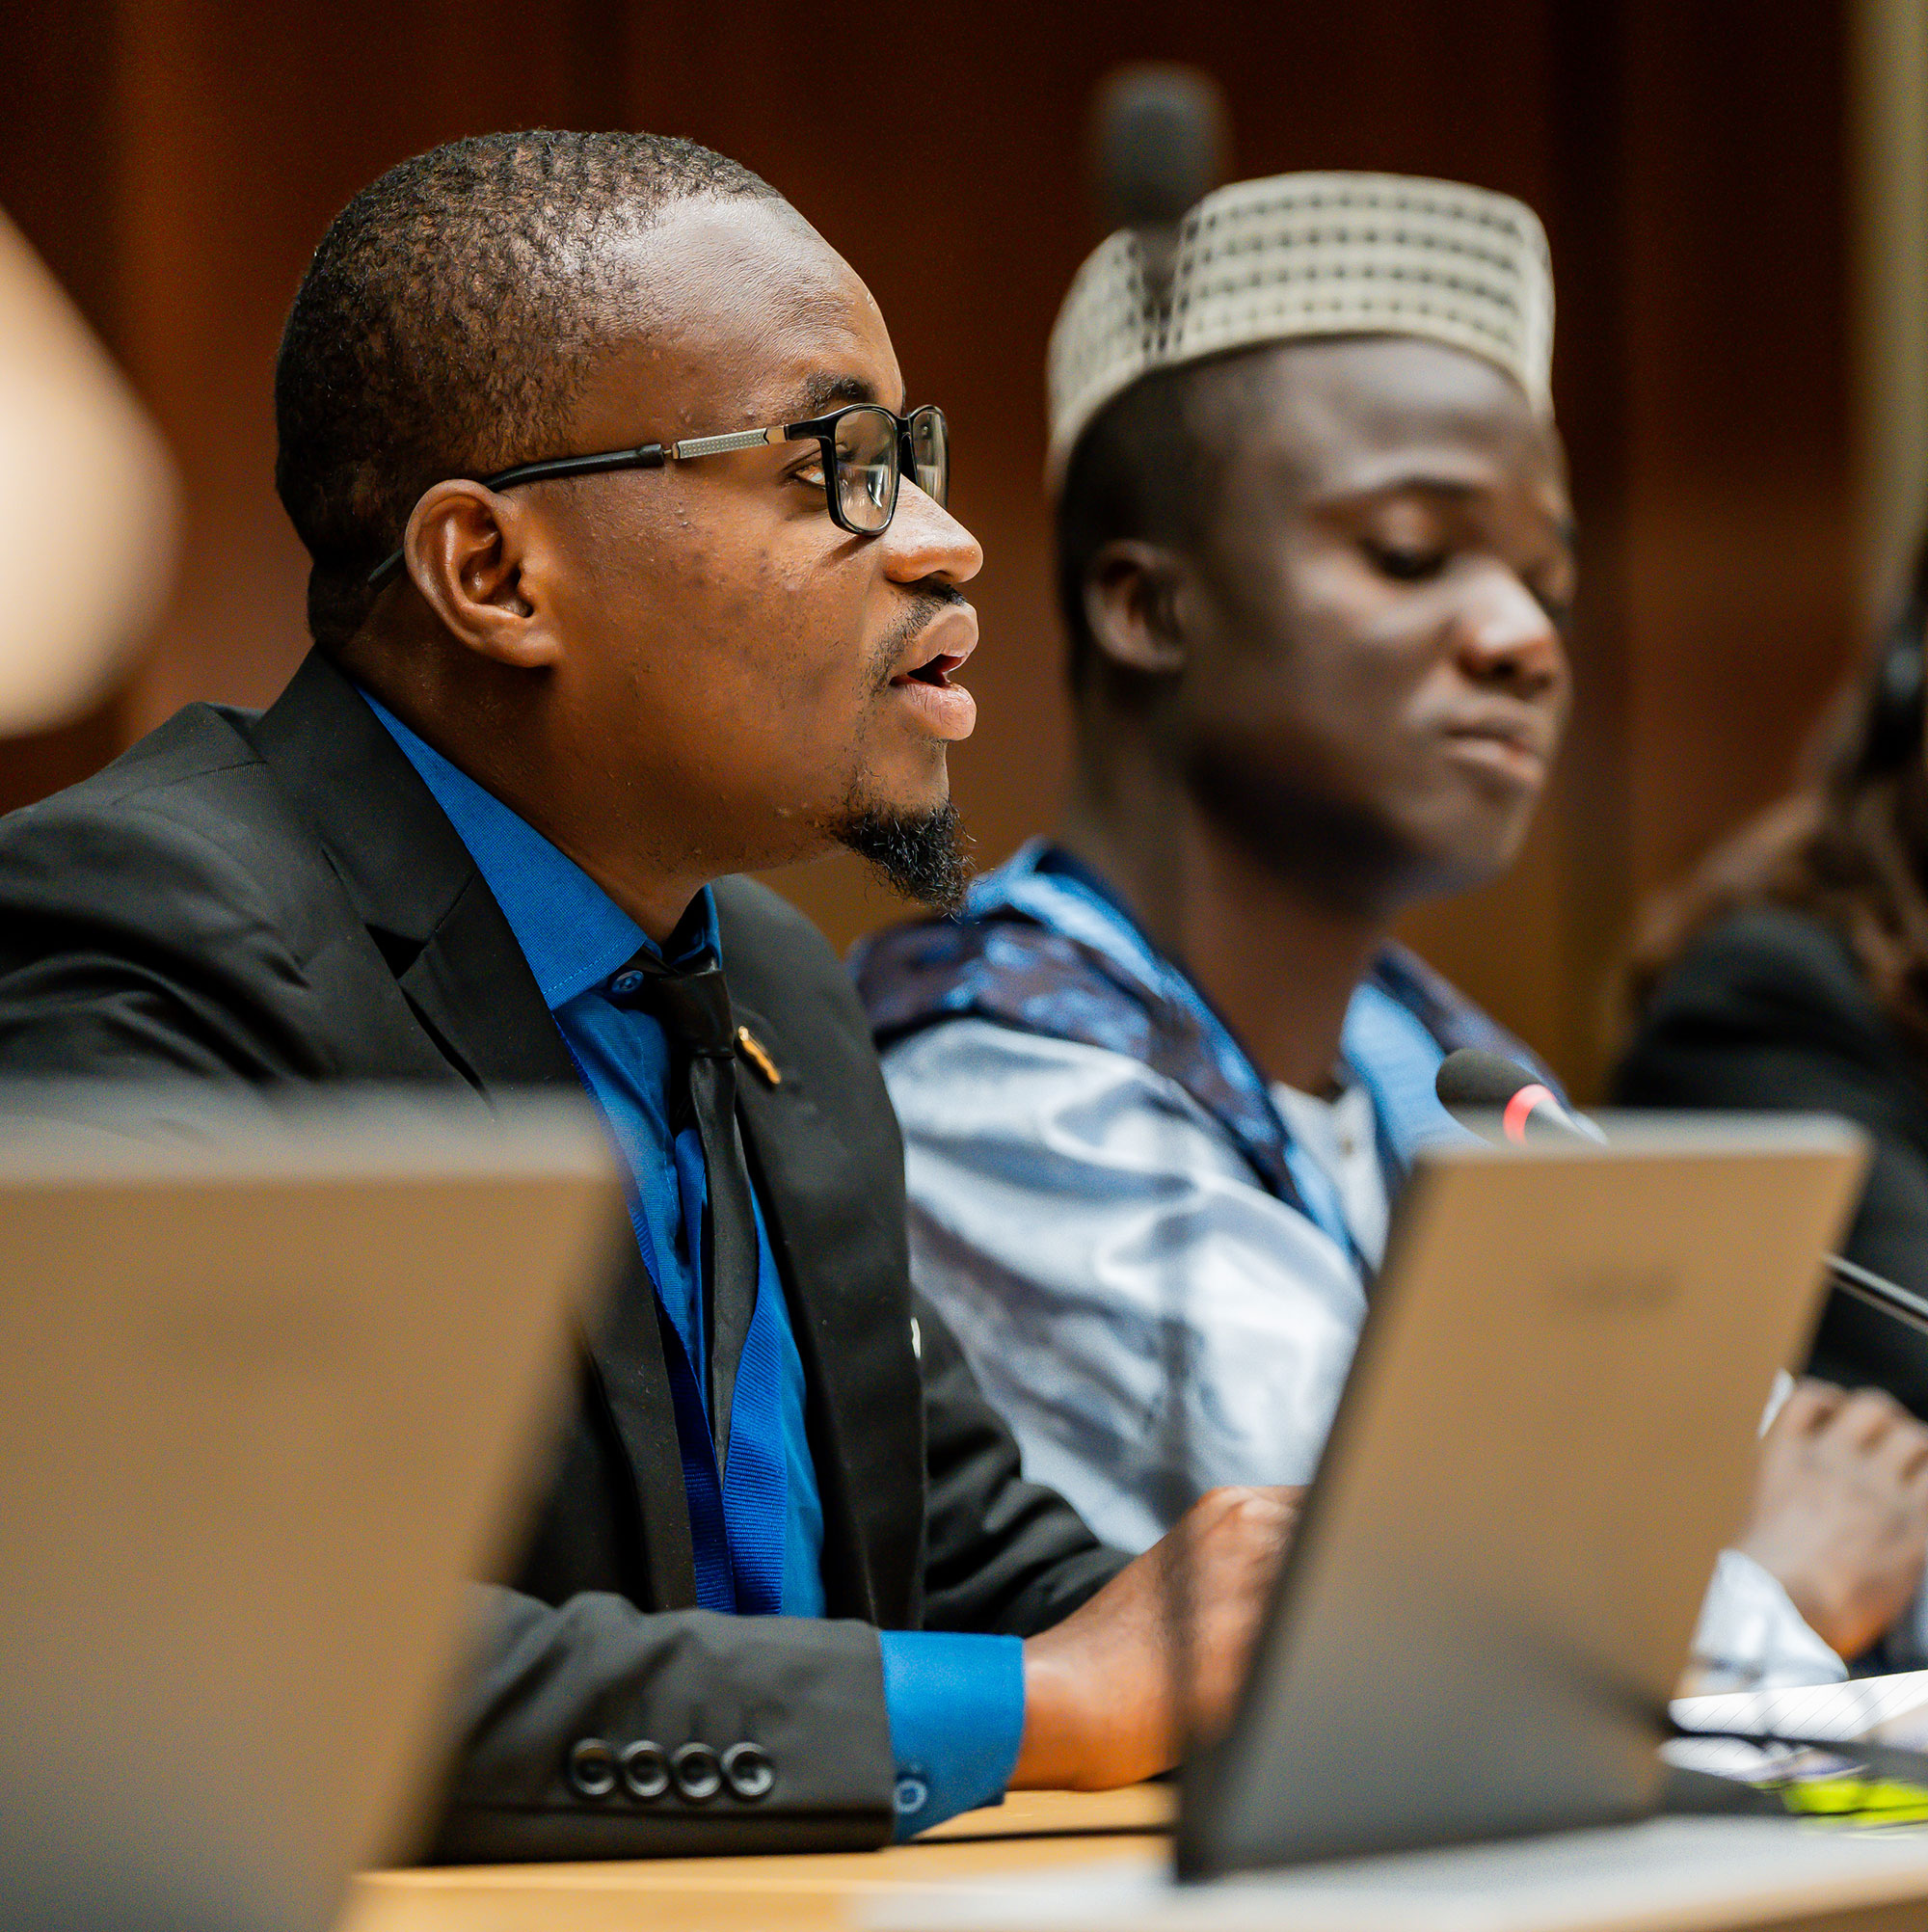 A journalist from Studio Kalangou, the Fondation Hirondelle media in Niger, at the EU-NGO Forum on Human Rights. © Daphne Matthys.